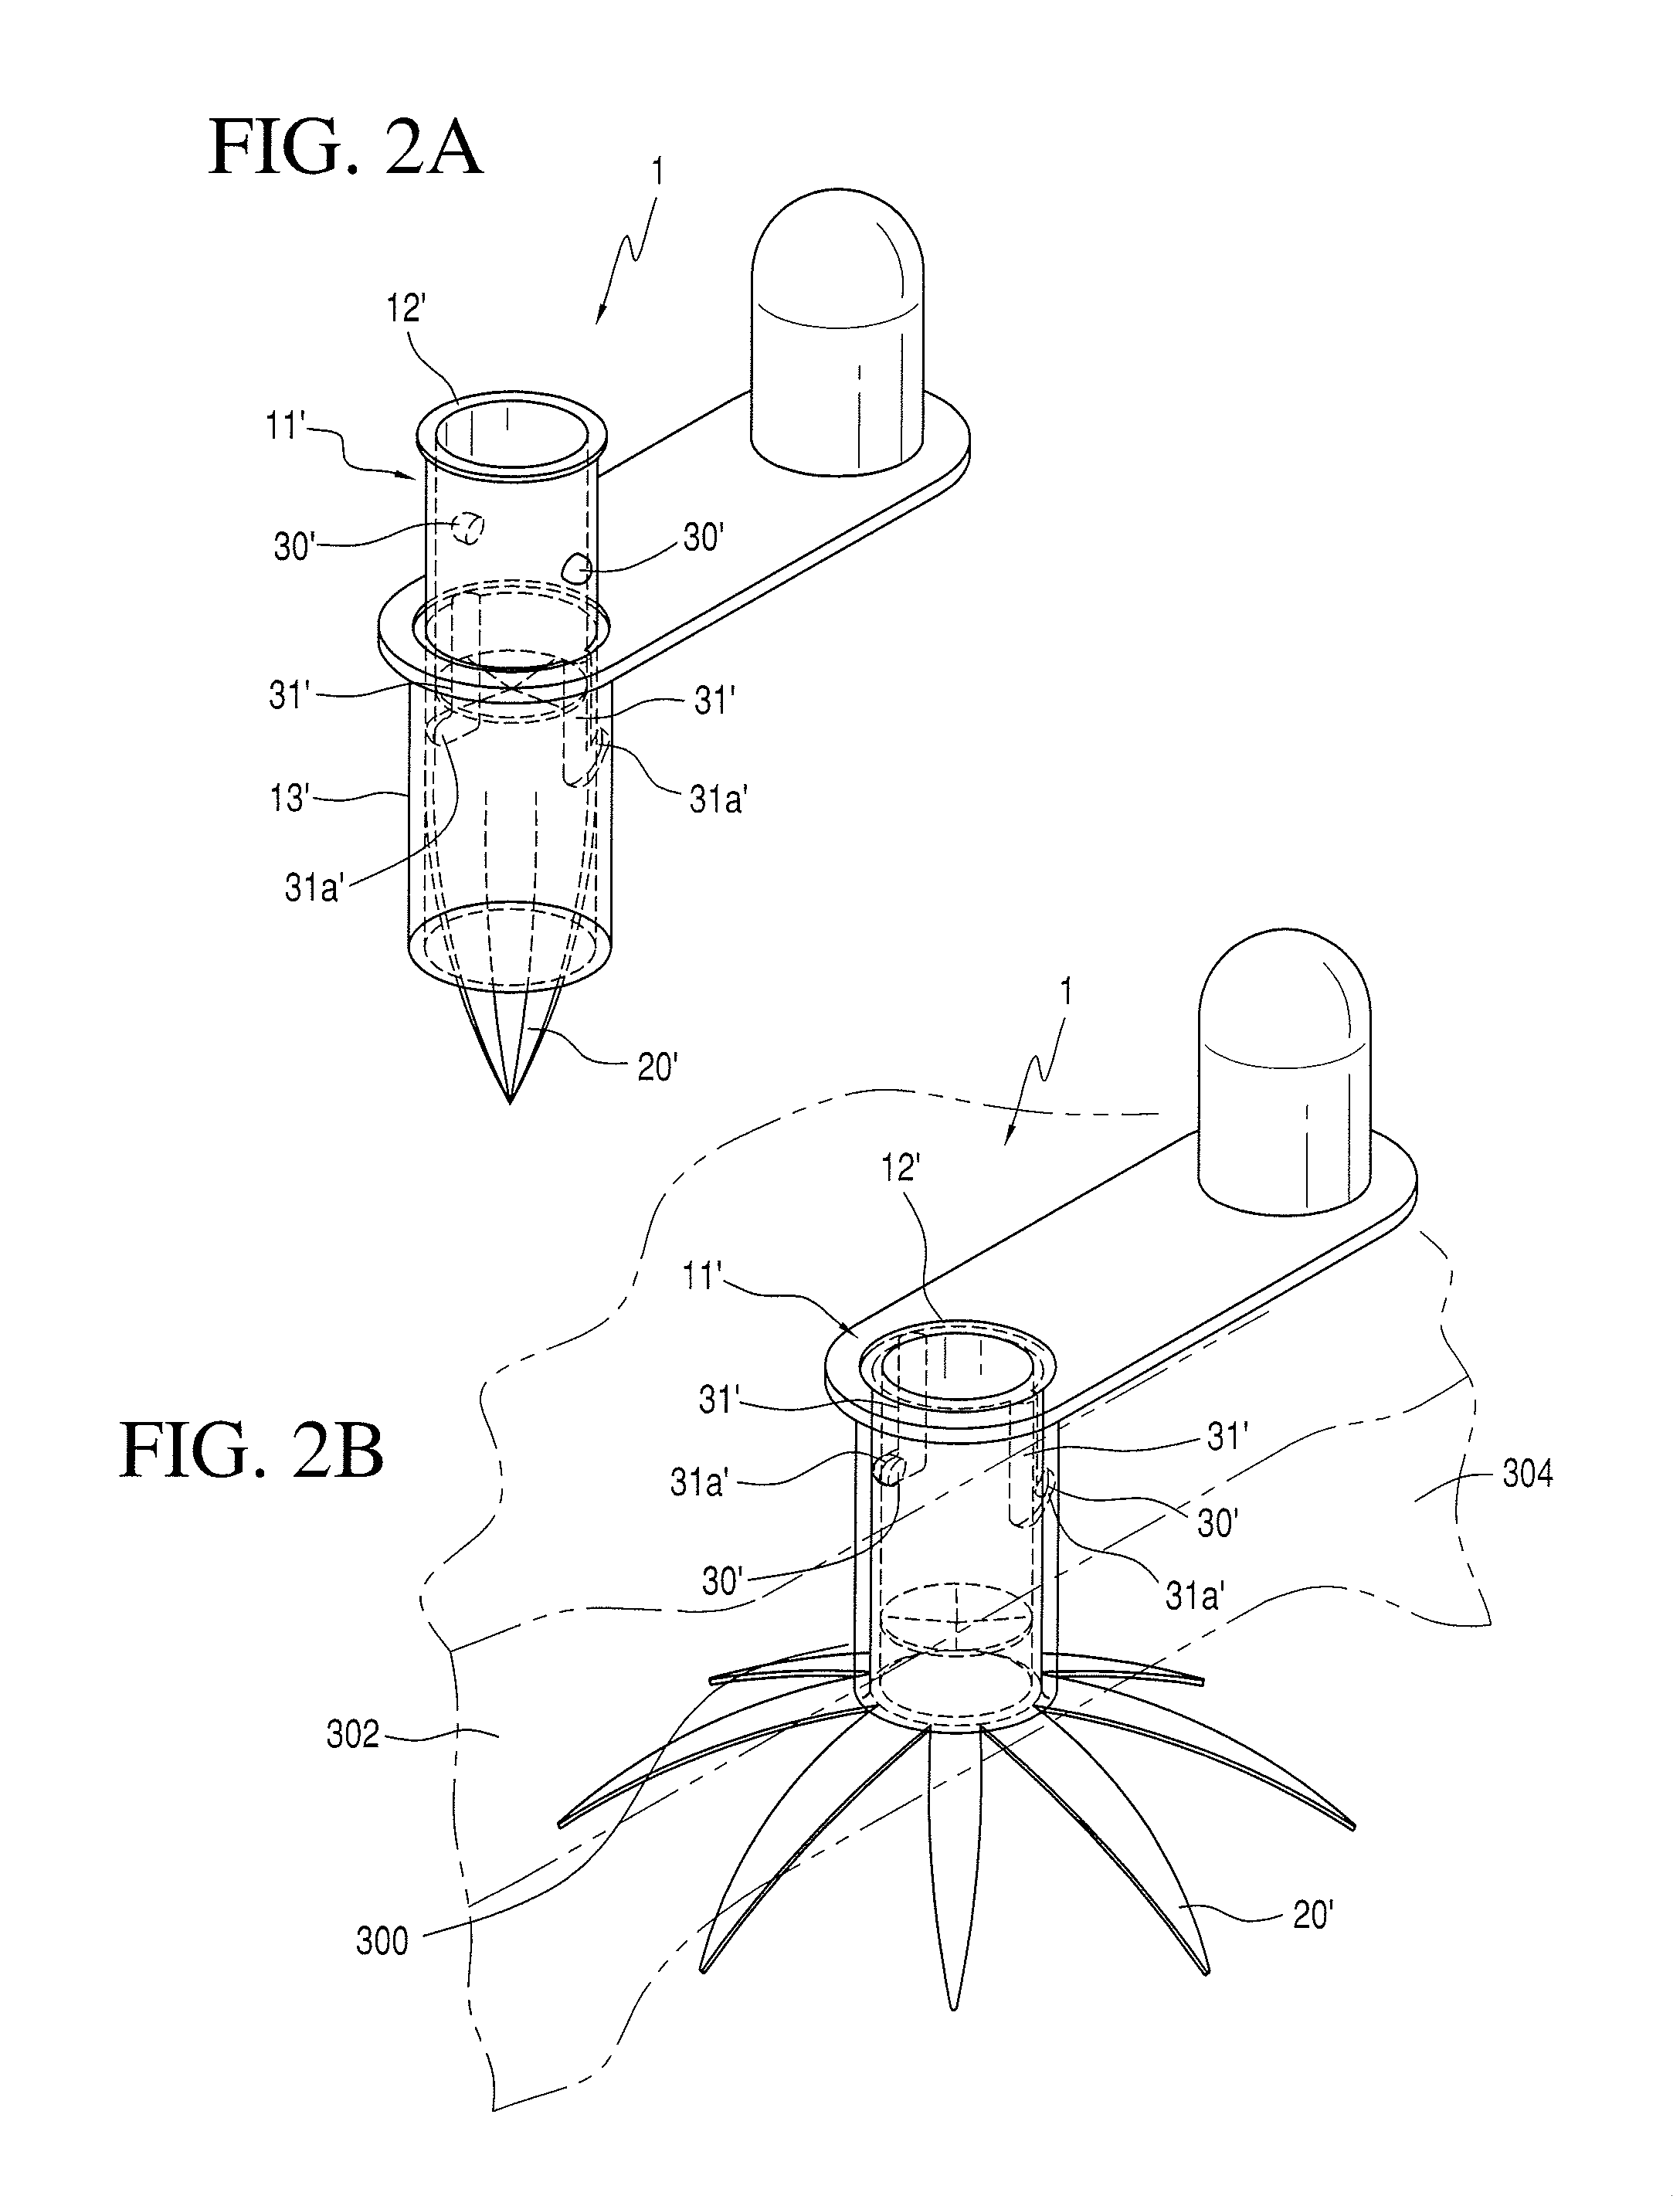 Retention device for gastrostomy tube and low profile gastrostomy device